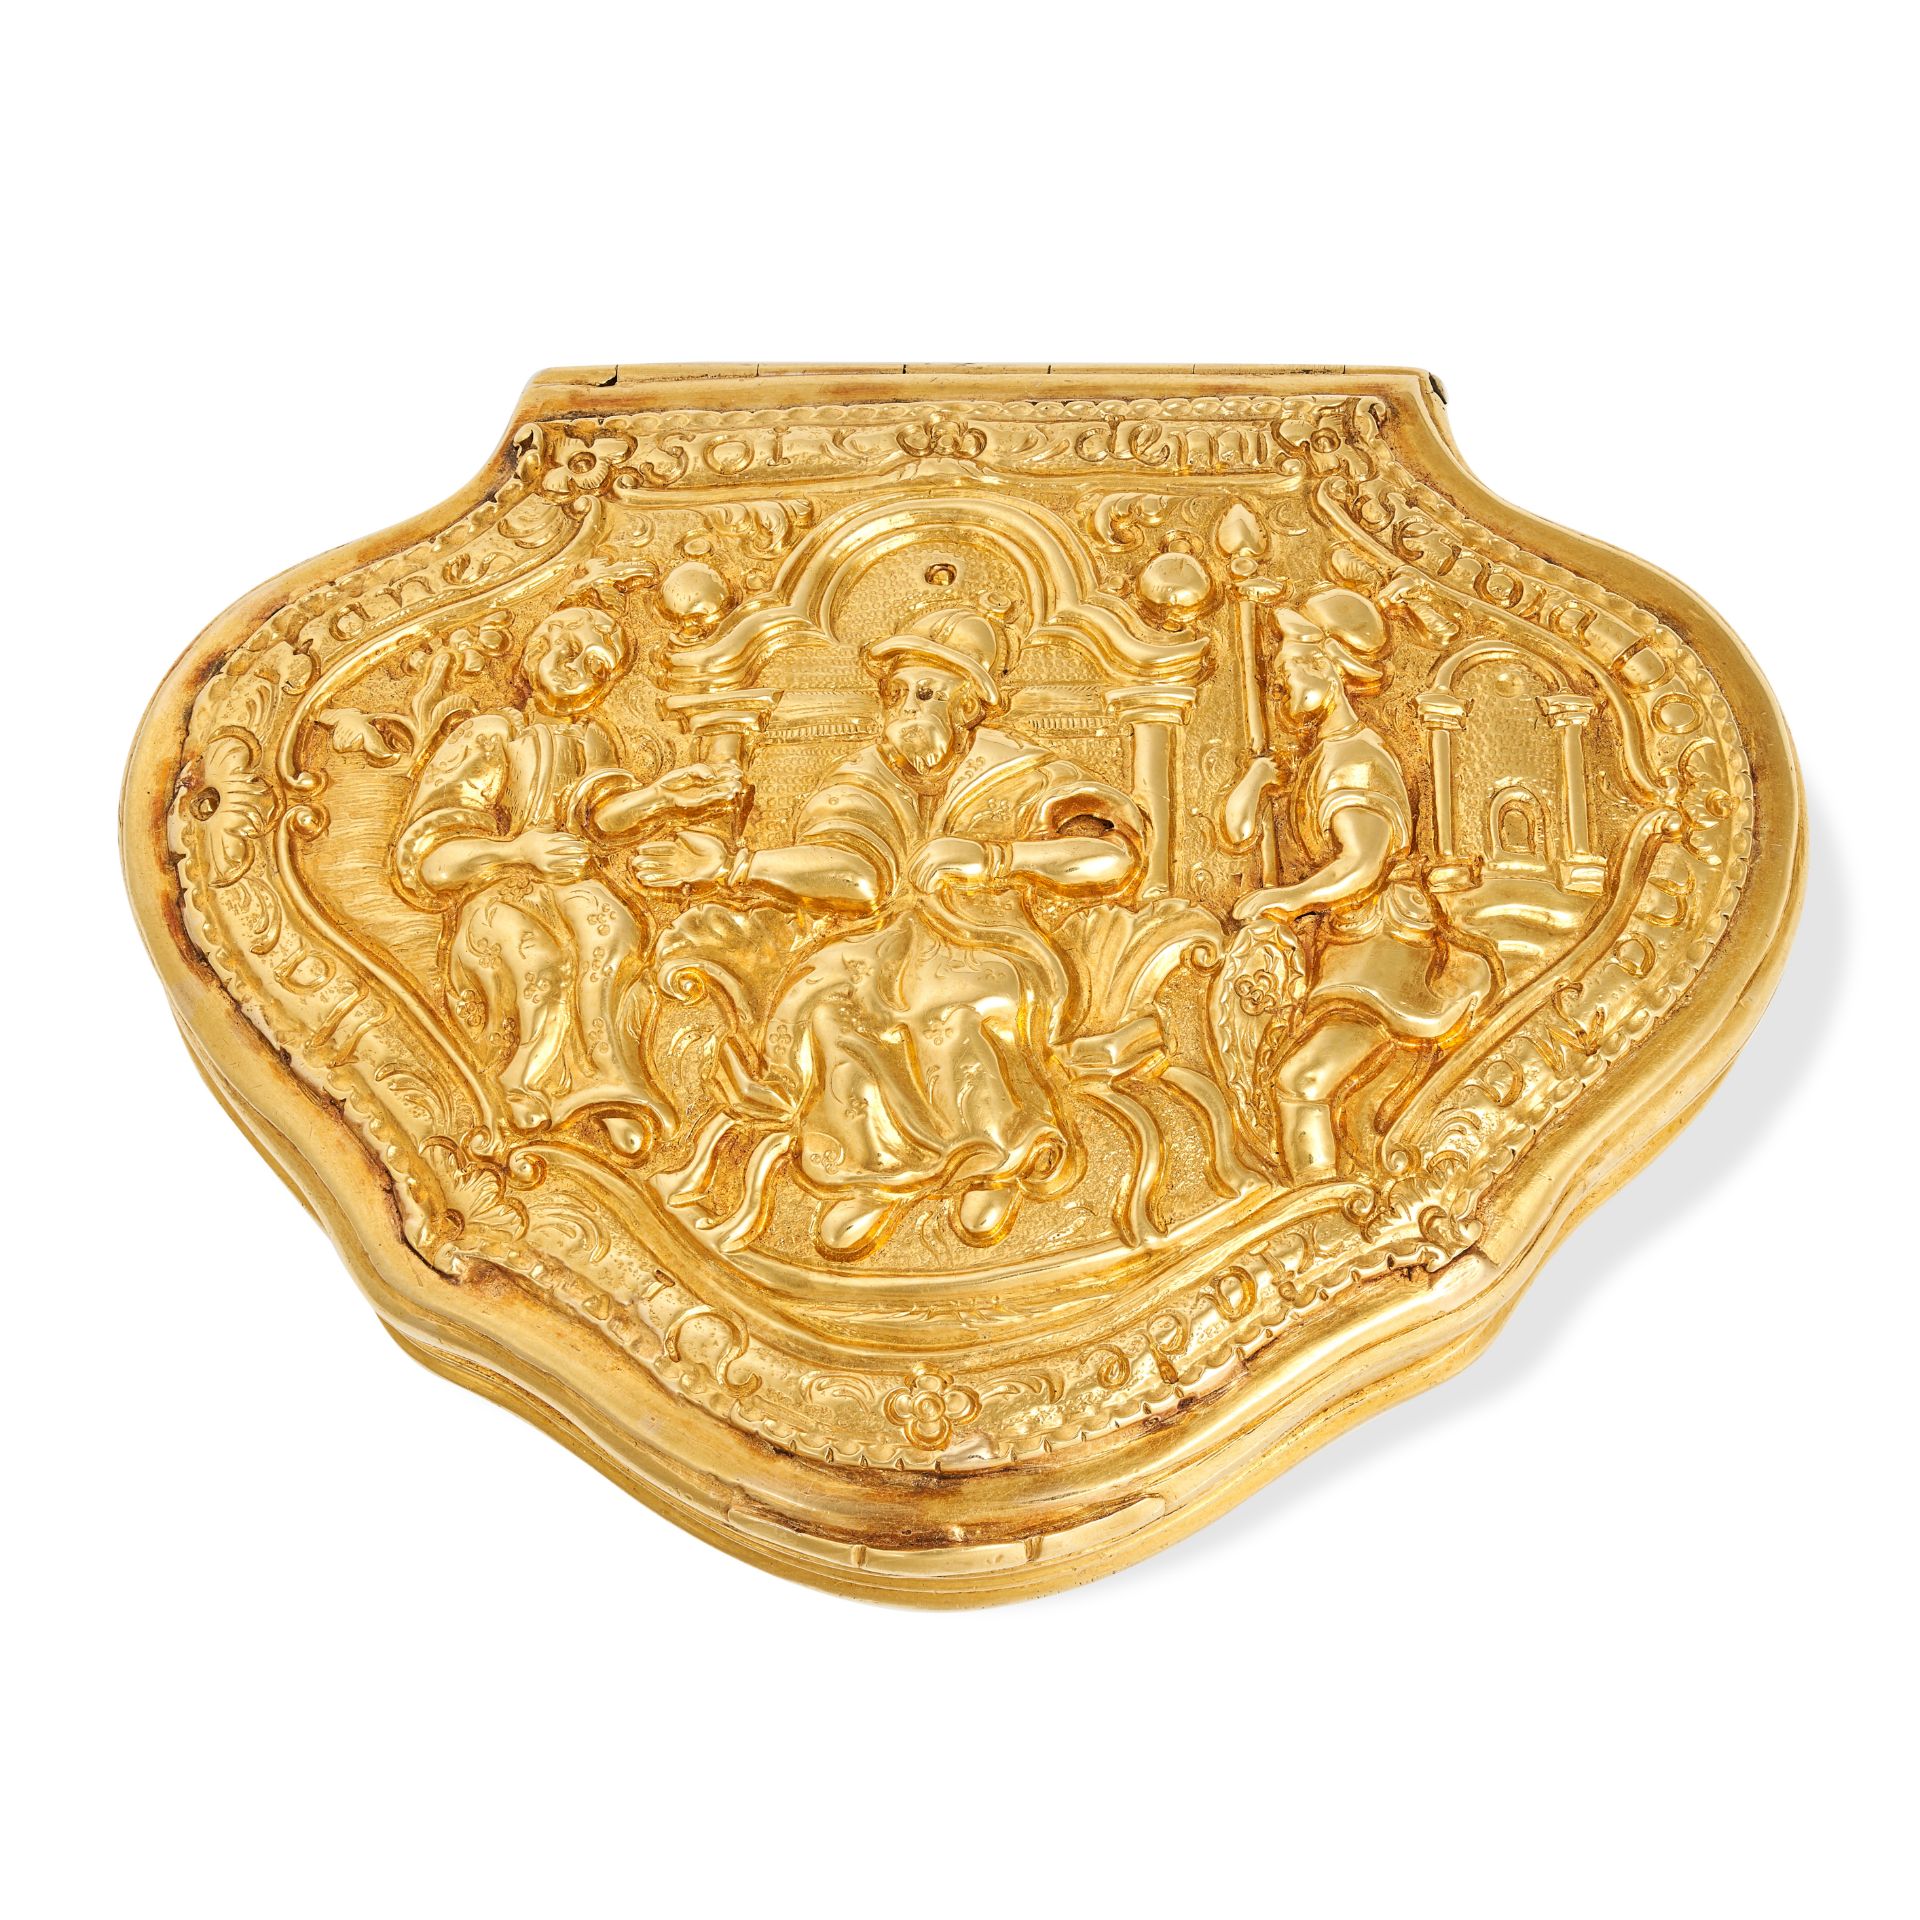 ANTIQUE GOLD REGIMENTAL SNUFF BOX, CIRCA 1750 in 18ct yellow gold, the lid is set with a scene of...